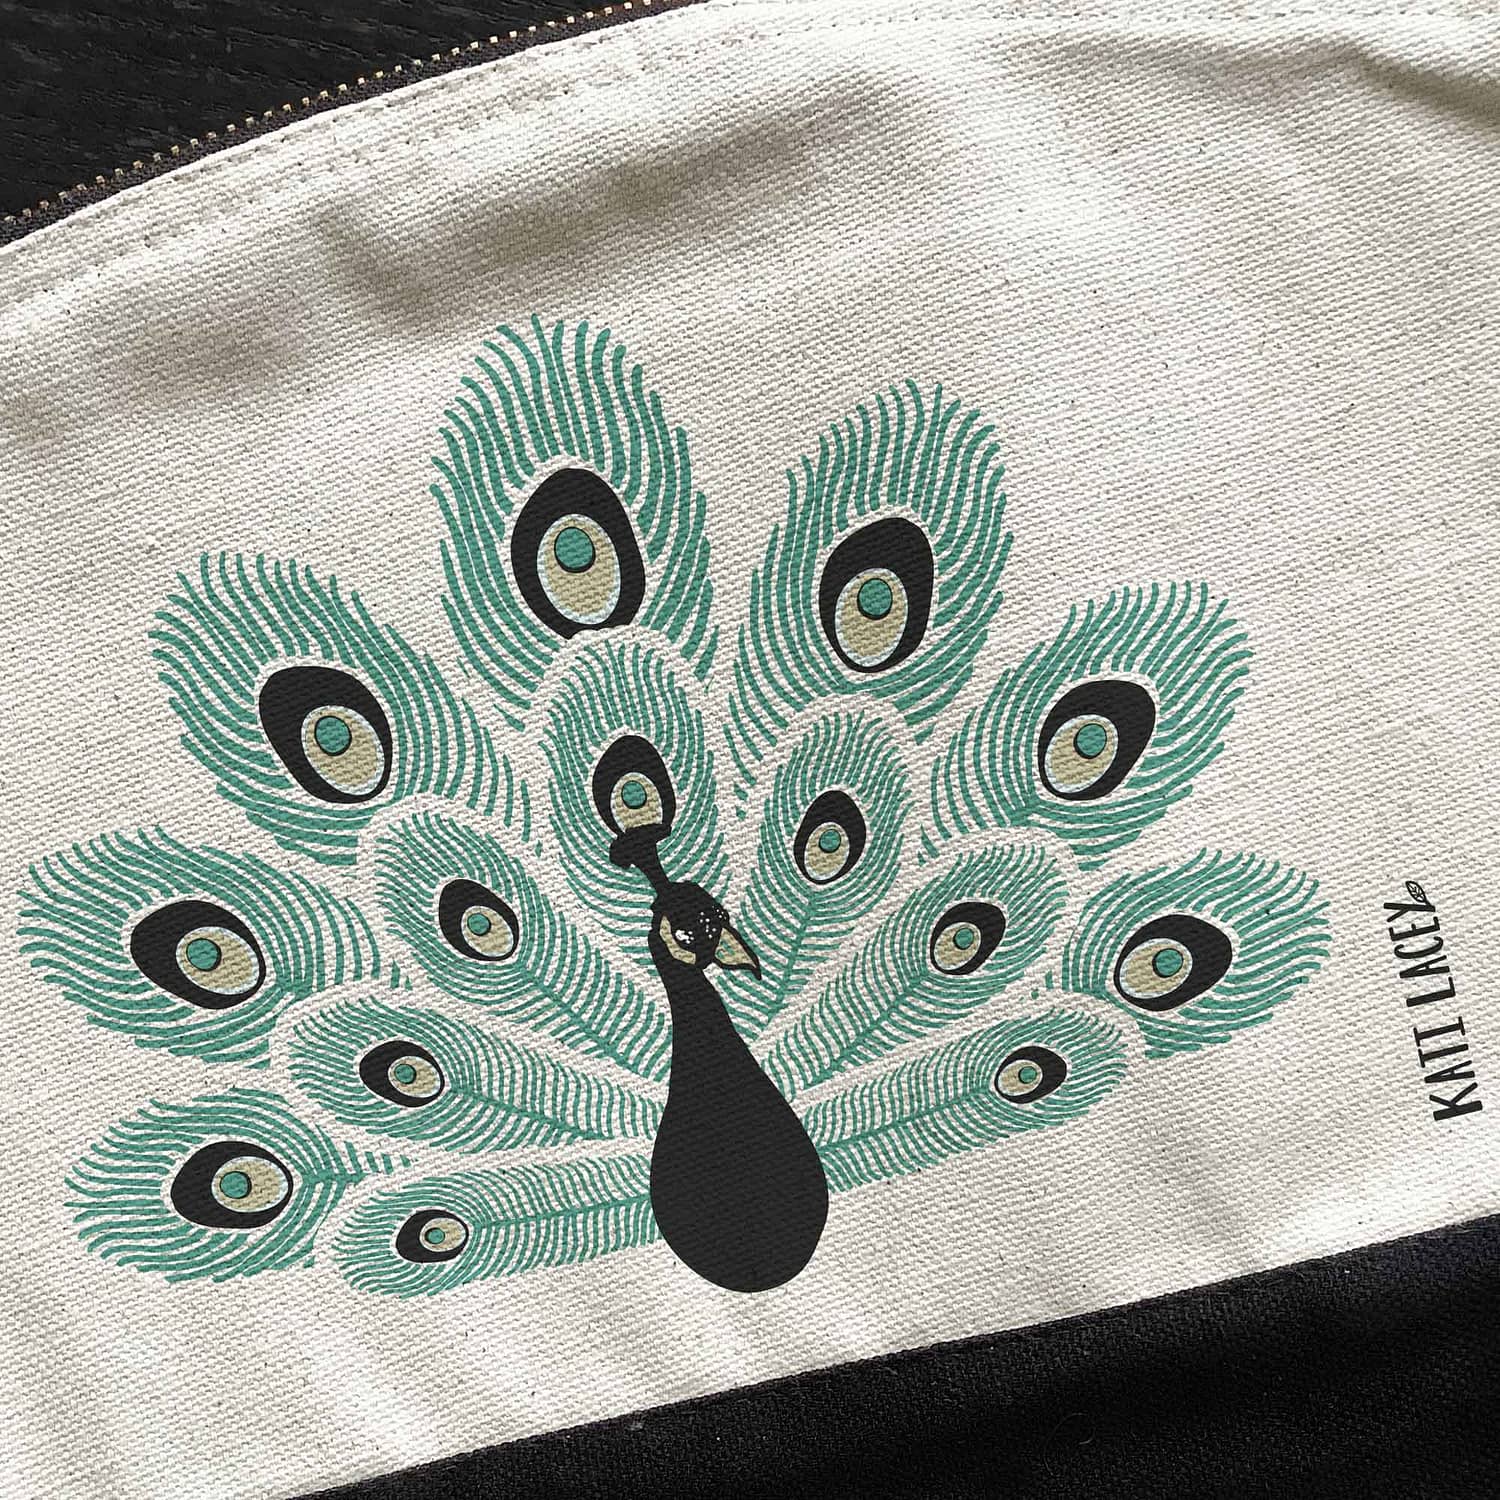 Peacock on pouch-washbag-toiletry bag-pencil case-make up bag-storage bag for travel-medication bag-pouch-luxury-eco-friendly cotton-sustainable